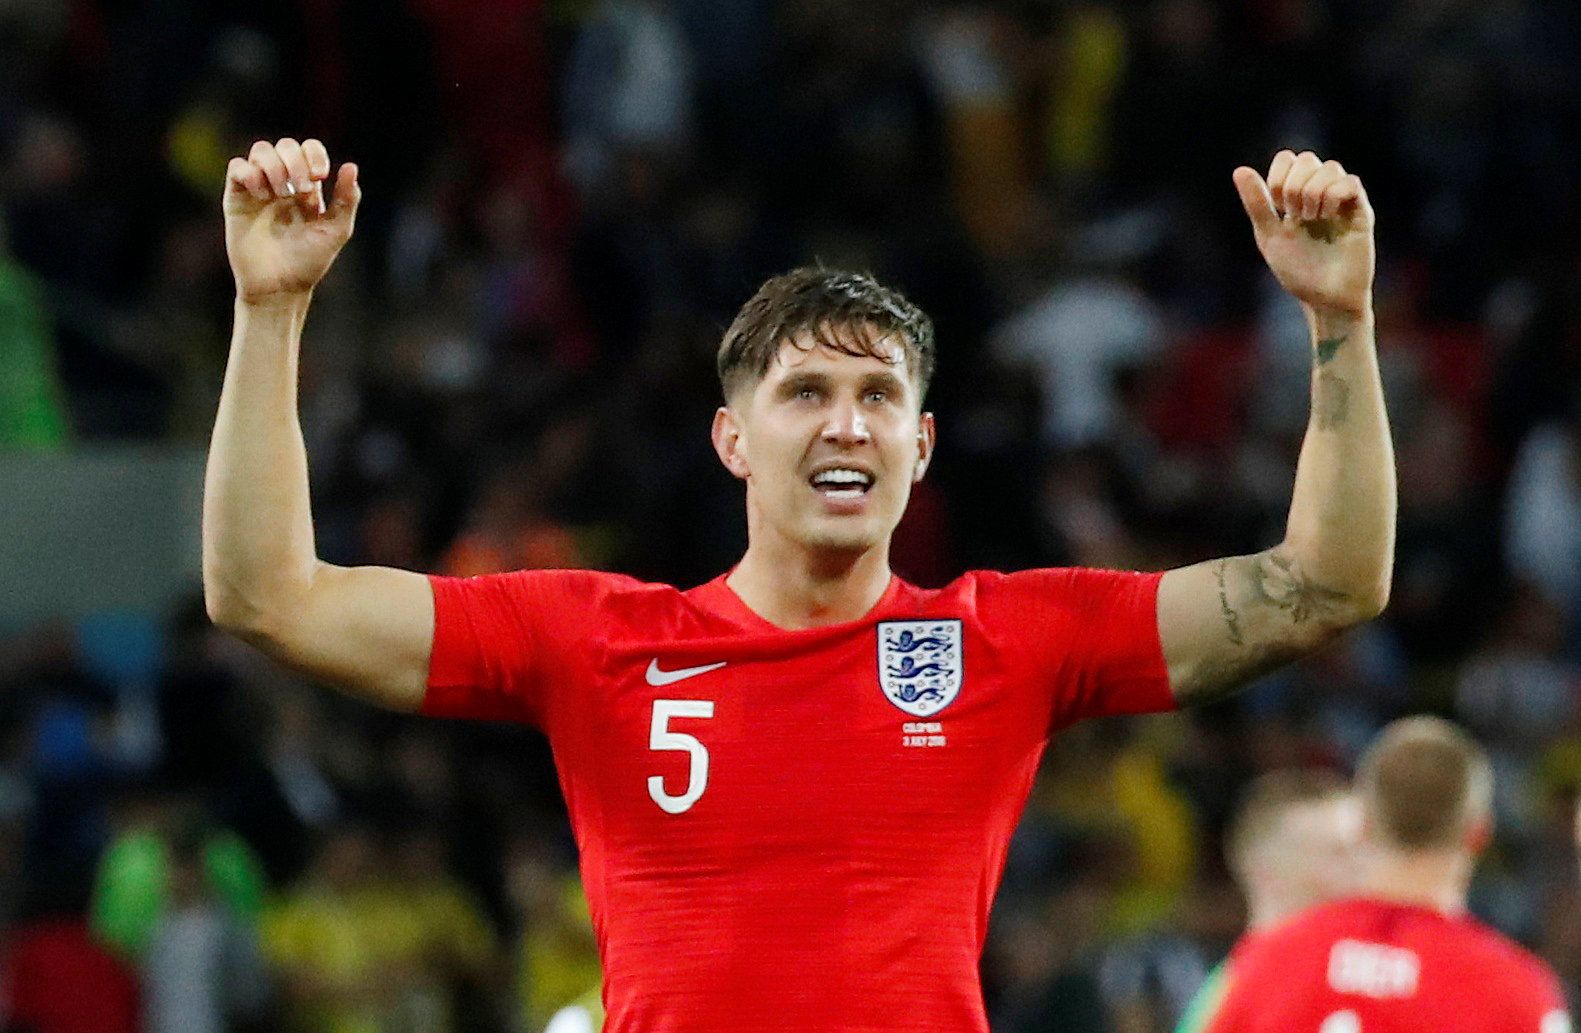 Soccer Football - World Cup - Round of 16 - Colombia vs England - Spartak Stadium, Moscow, Russia - July 3, 2018  England's John Stones celebrates winning the penalty shootout    REUTERS/Maxim Shemetov